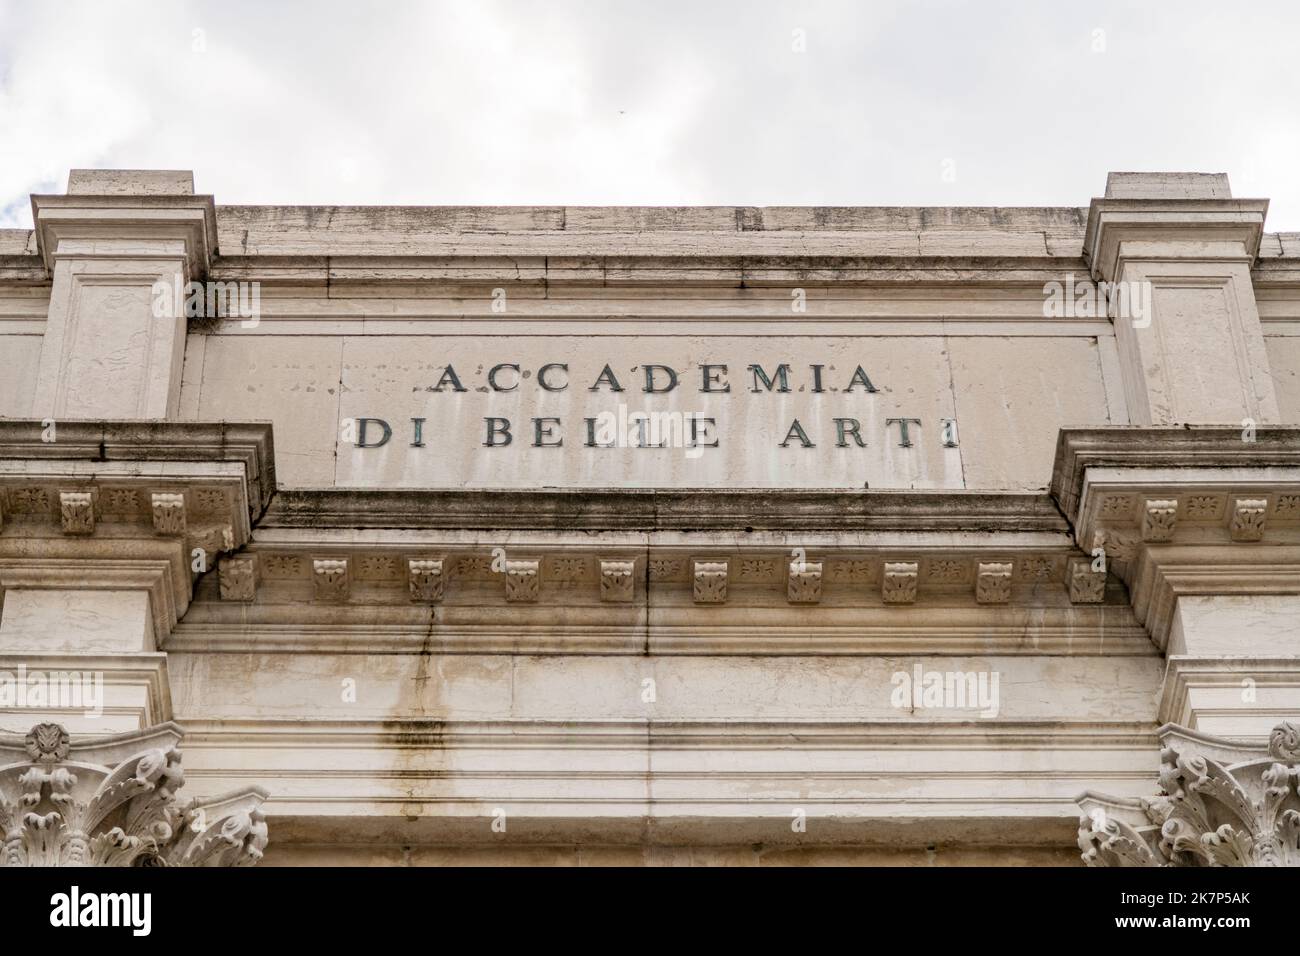 The entrance to Gallerie dell'Accademia art gallery in Venice, Italy Stock Photo